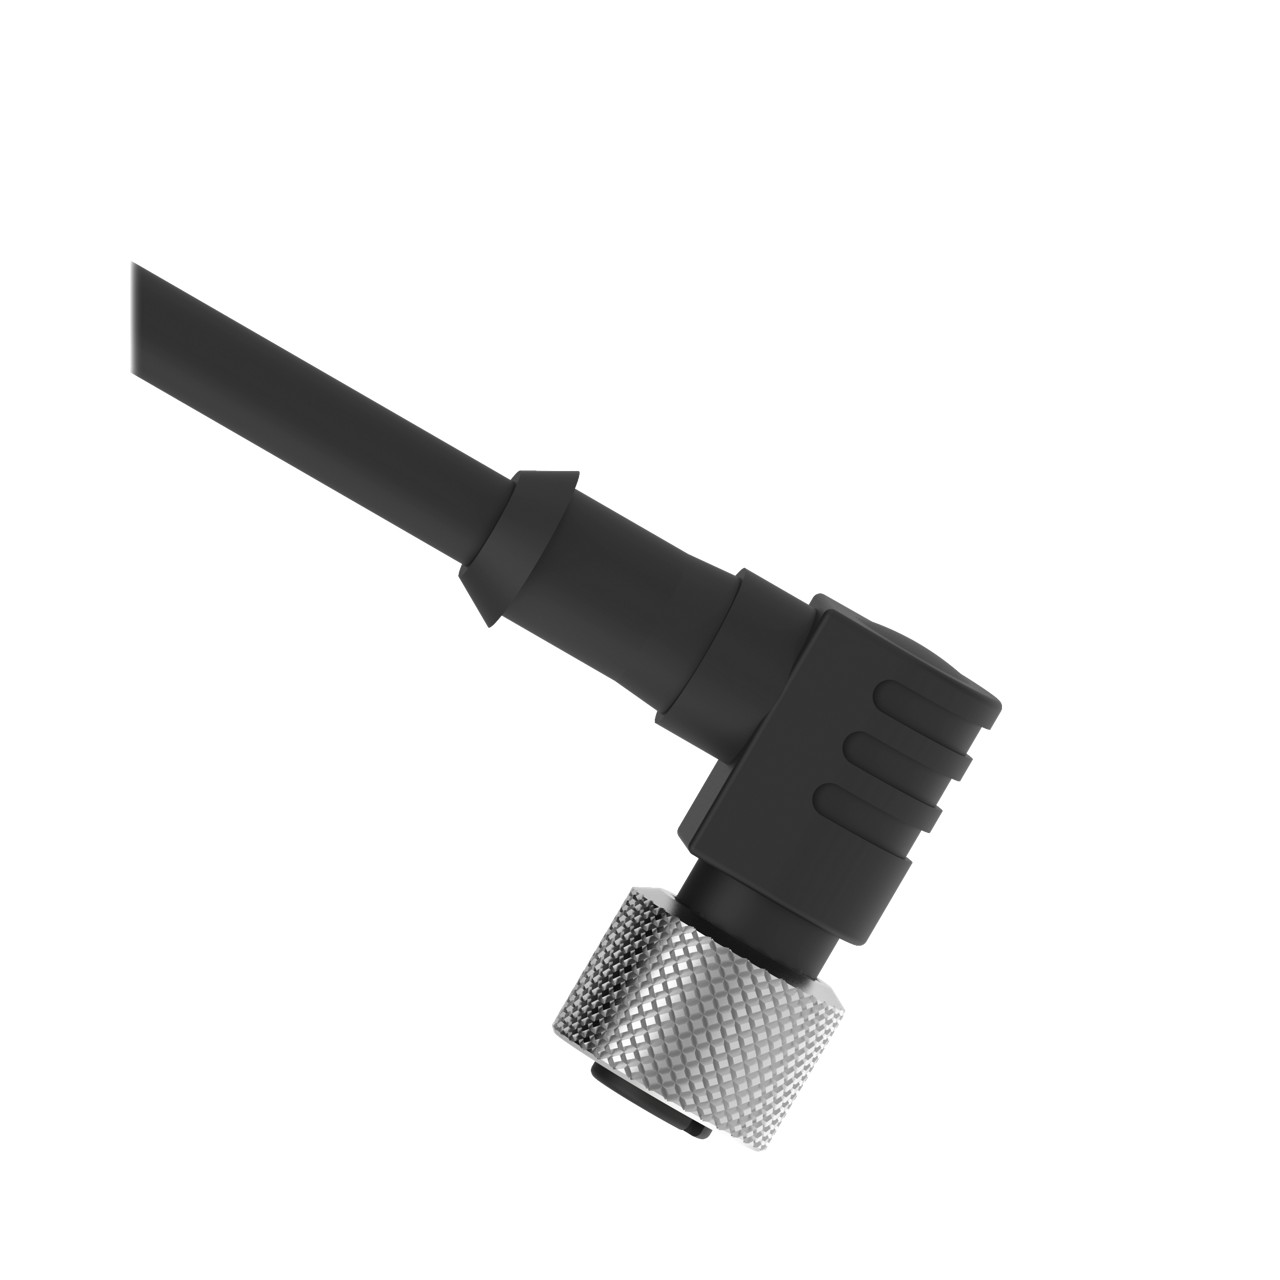 MQDEC2-506RA - Cordset A-Code M12 Single Ended; 5-pin Right-Angle Female Connector with Shield; 2 m